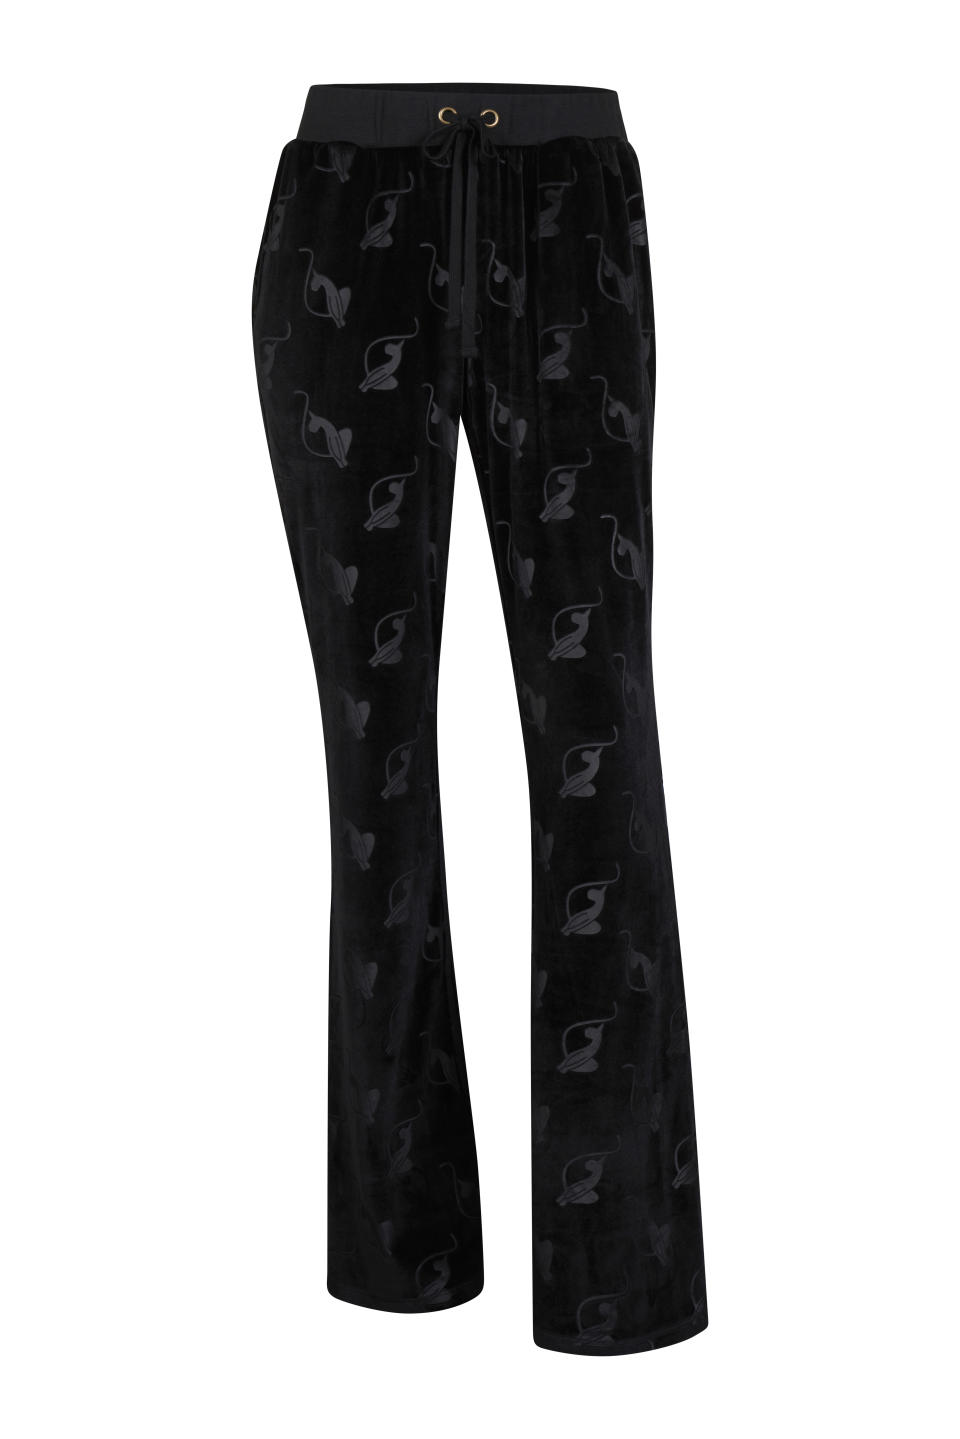 This photo shows the Aubrey velour track pant from Baby Phat. The brand is back with new collections from founder Kimora Lee Simmons. Y2K nostalgia is a good option for holiday gifts. (Baby Phat via AP)